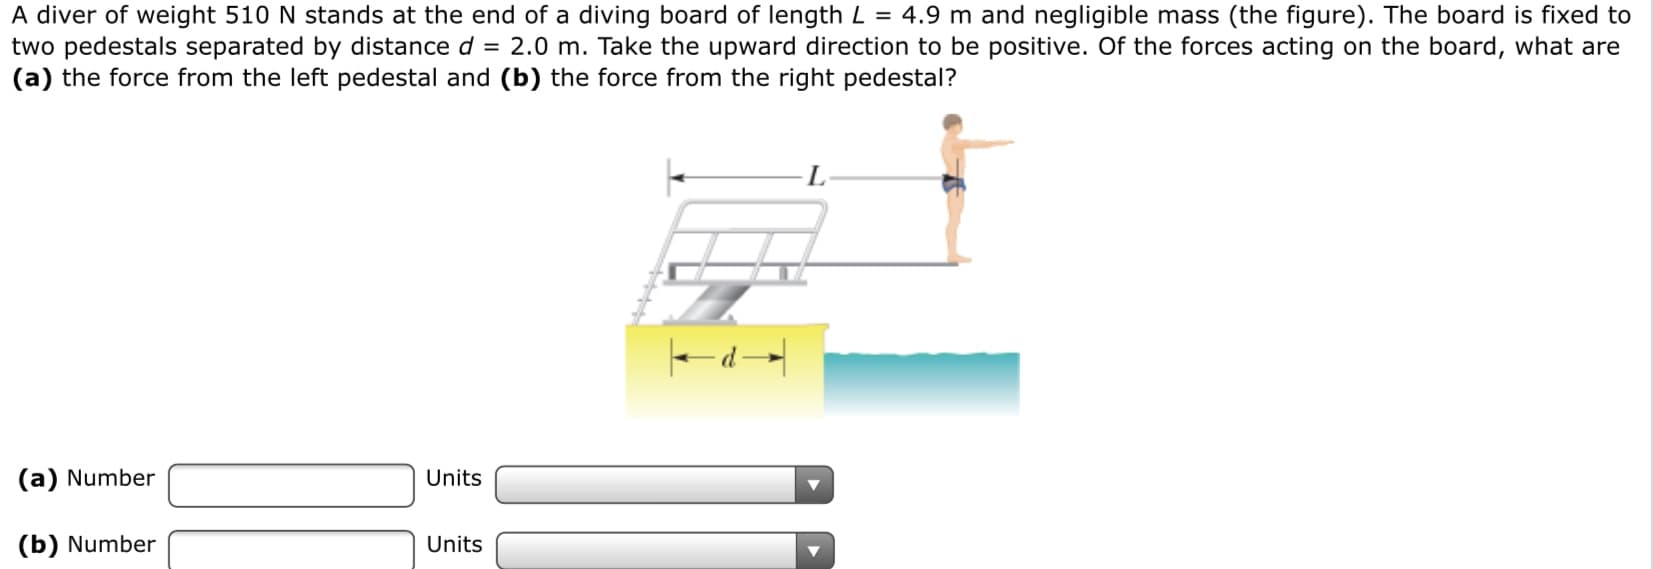 A diver of weight 510 N stands at the end of a diving board of length L = 4.9 m and negligible mass (the figure). The board is fixed to
two pedestals separated by distance d = 2.0 m. Take the upward direction to be positive. Of the forces acting on the board, what are
(a) the force from the left pedestal and (b) the force from the right pedestal?
L
(a) Number
Units
(b) Number
Units
